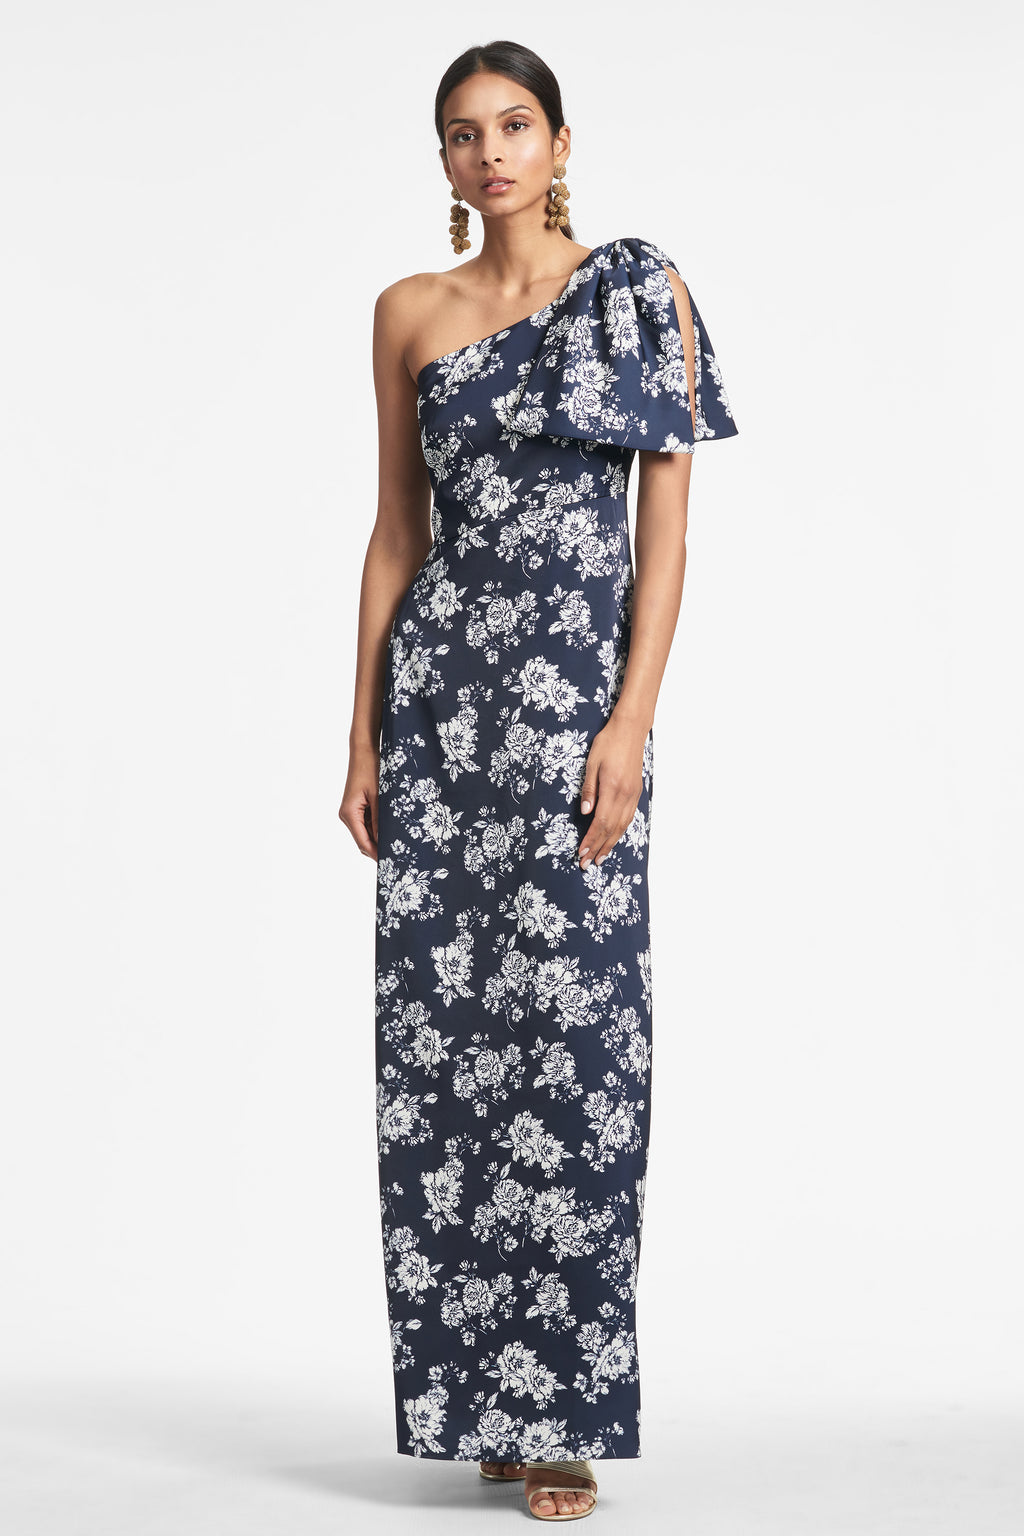 Chelsea Gown in Navy & Ivory Peony - Sachin & Babi